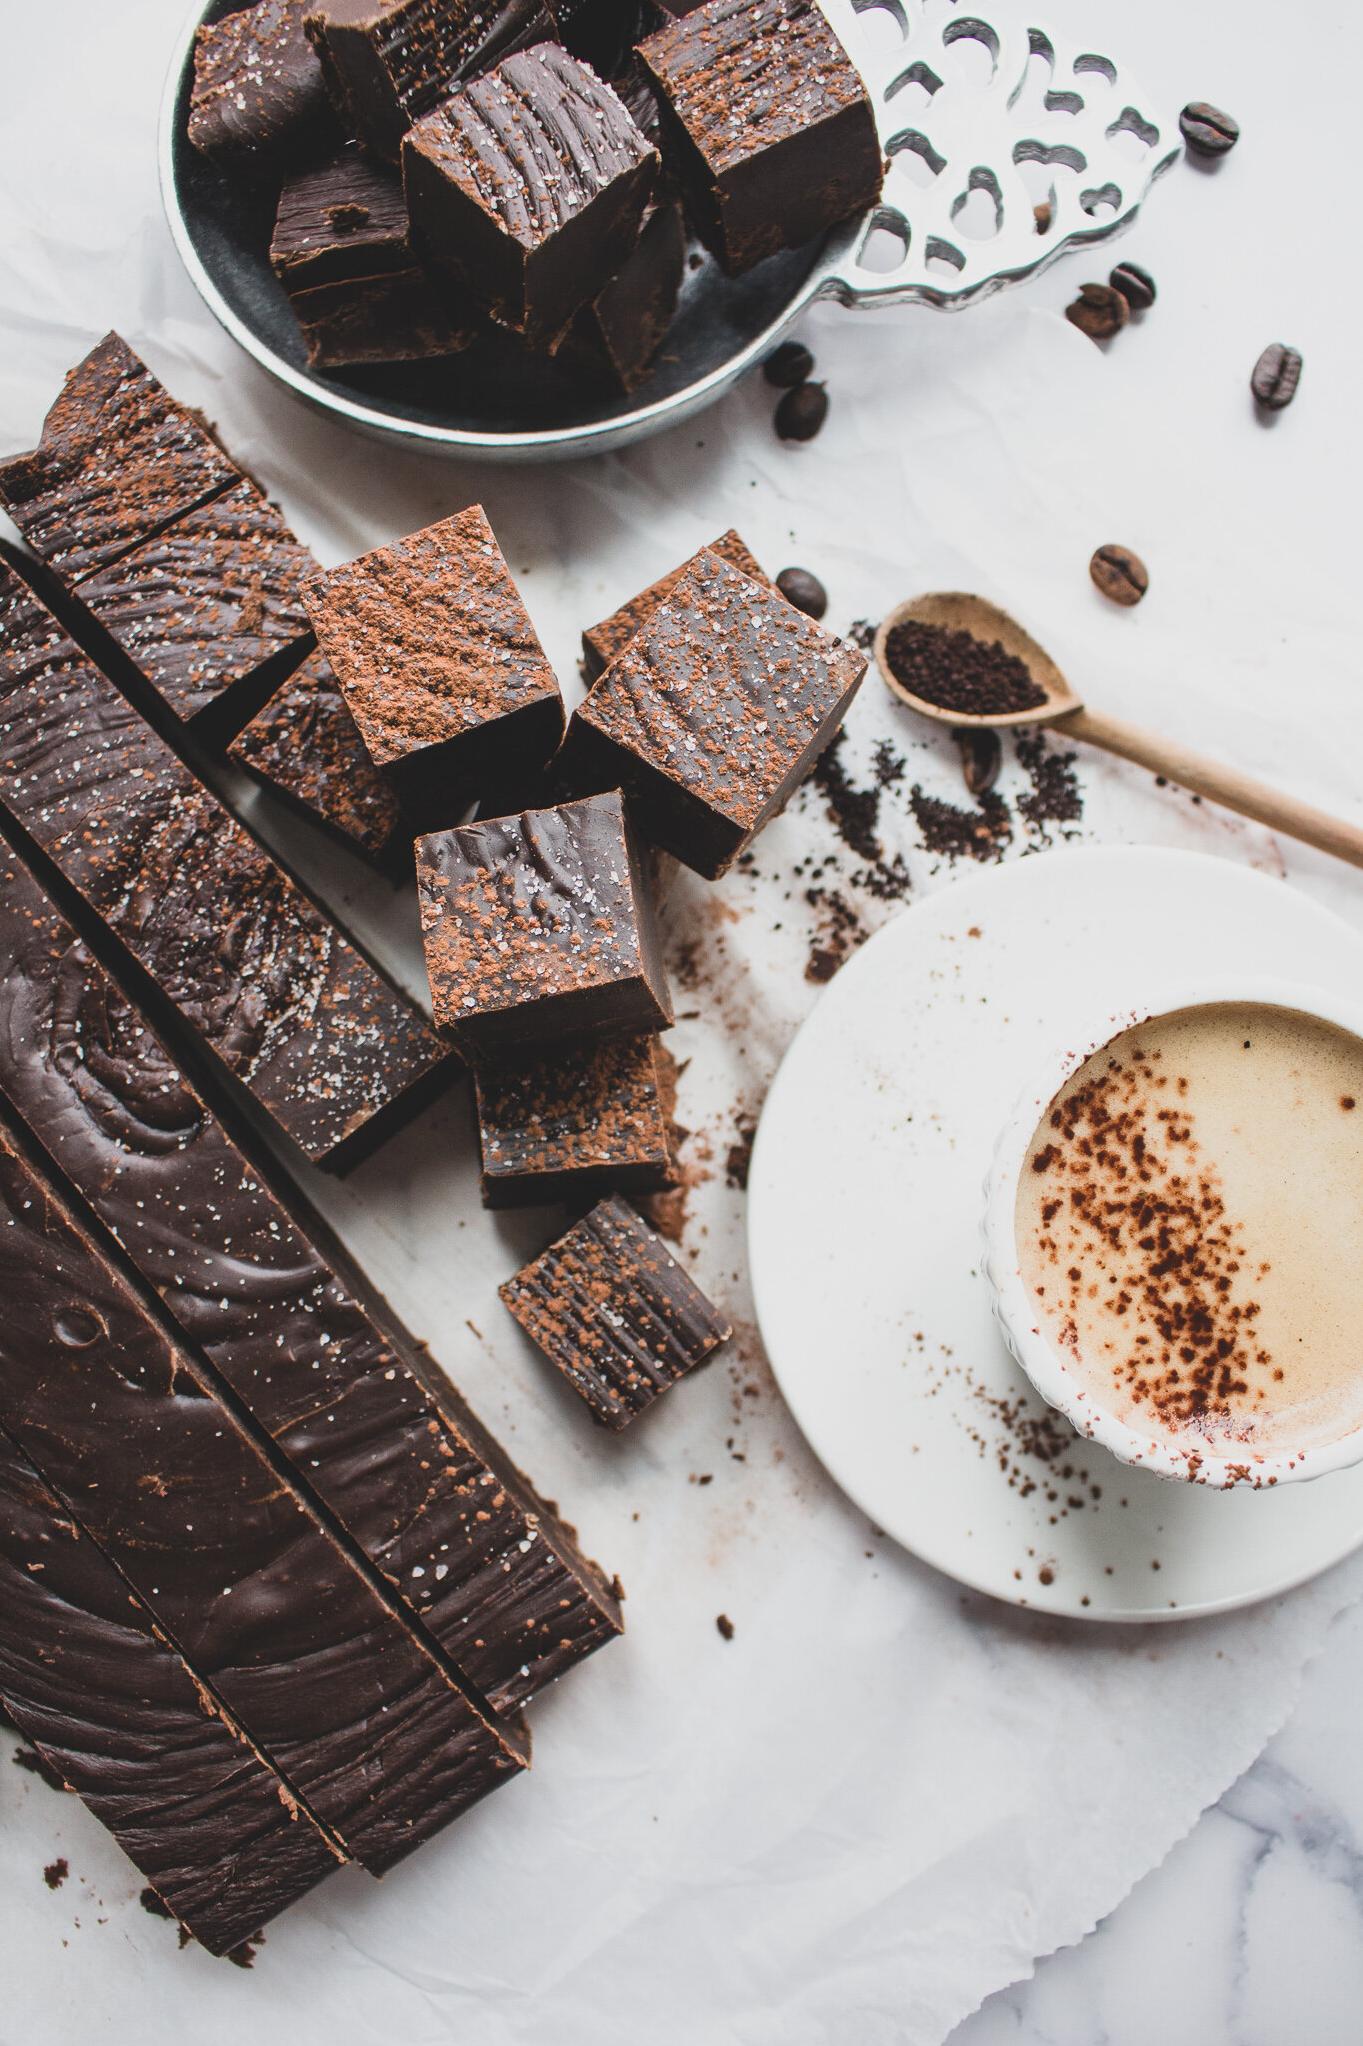  A match made in heaven: chocolate and espresso